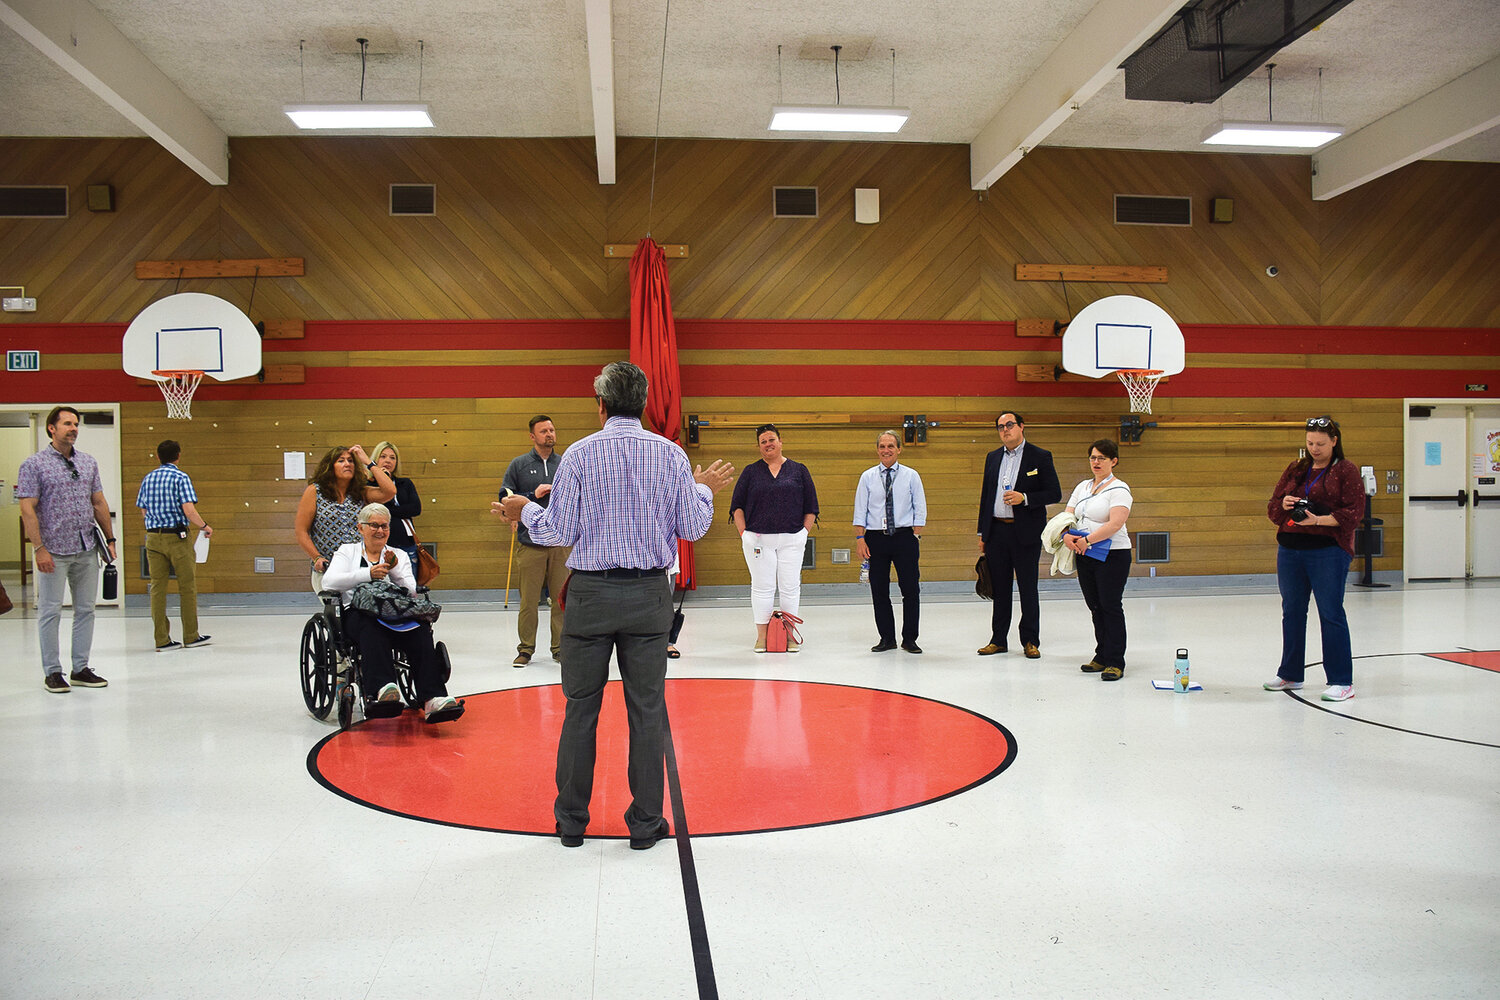 Glenwood Heights Primary School Principal Antonio Lopez speaks to community members who attended the “Discover BGPS” tour in the school’s gym on May 25.